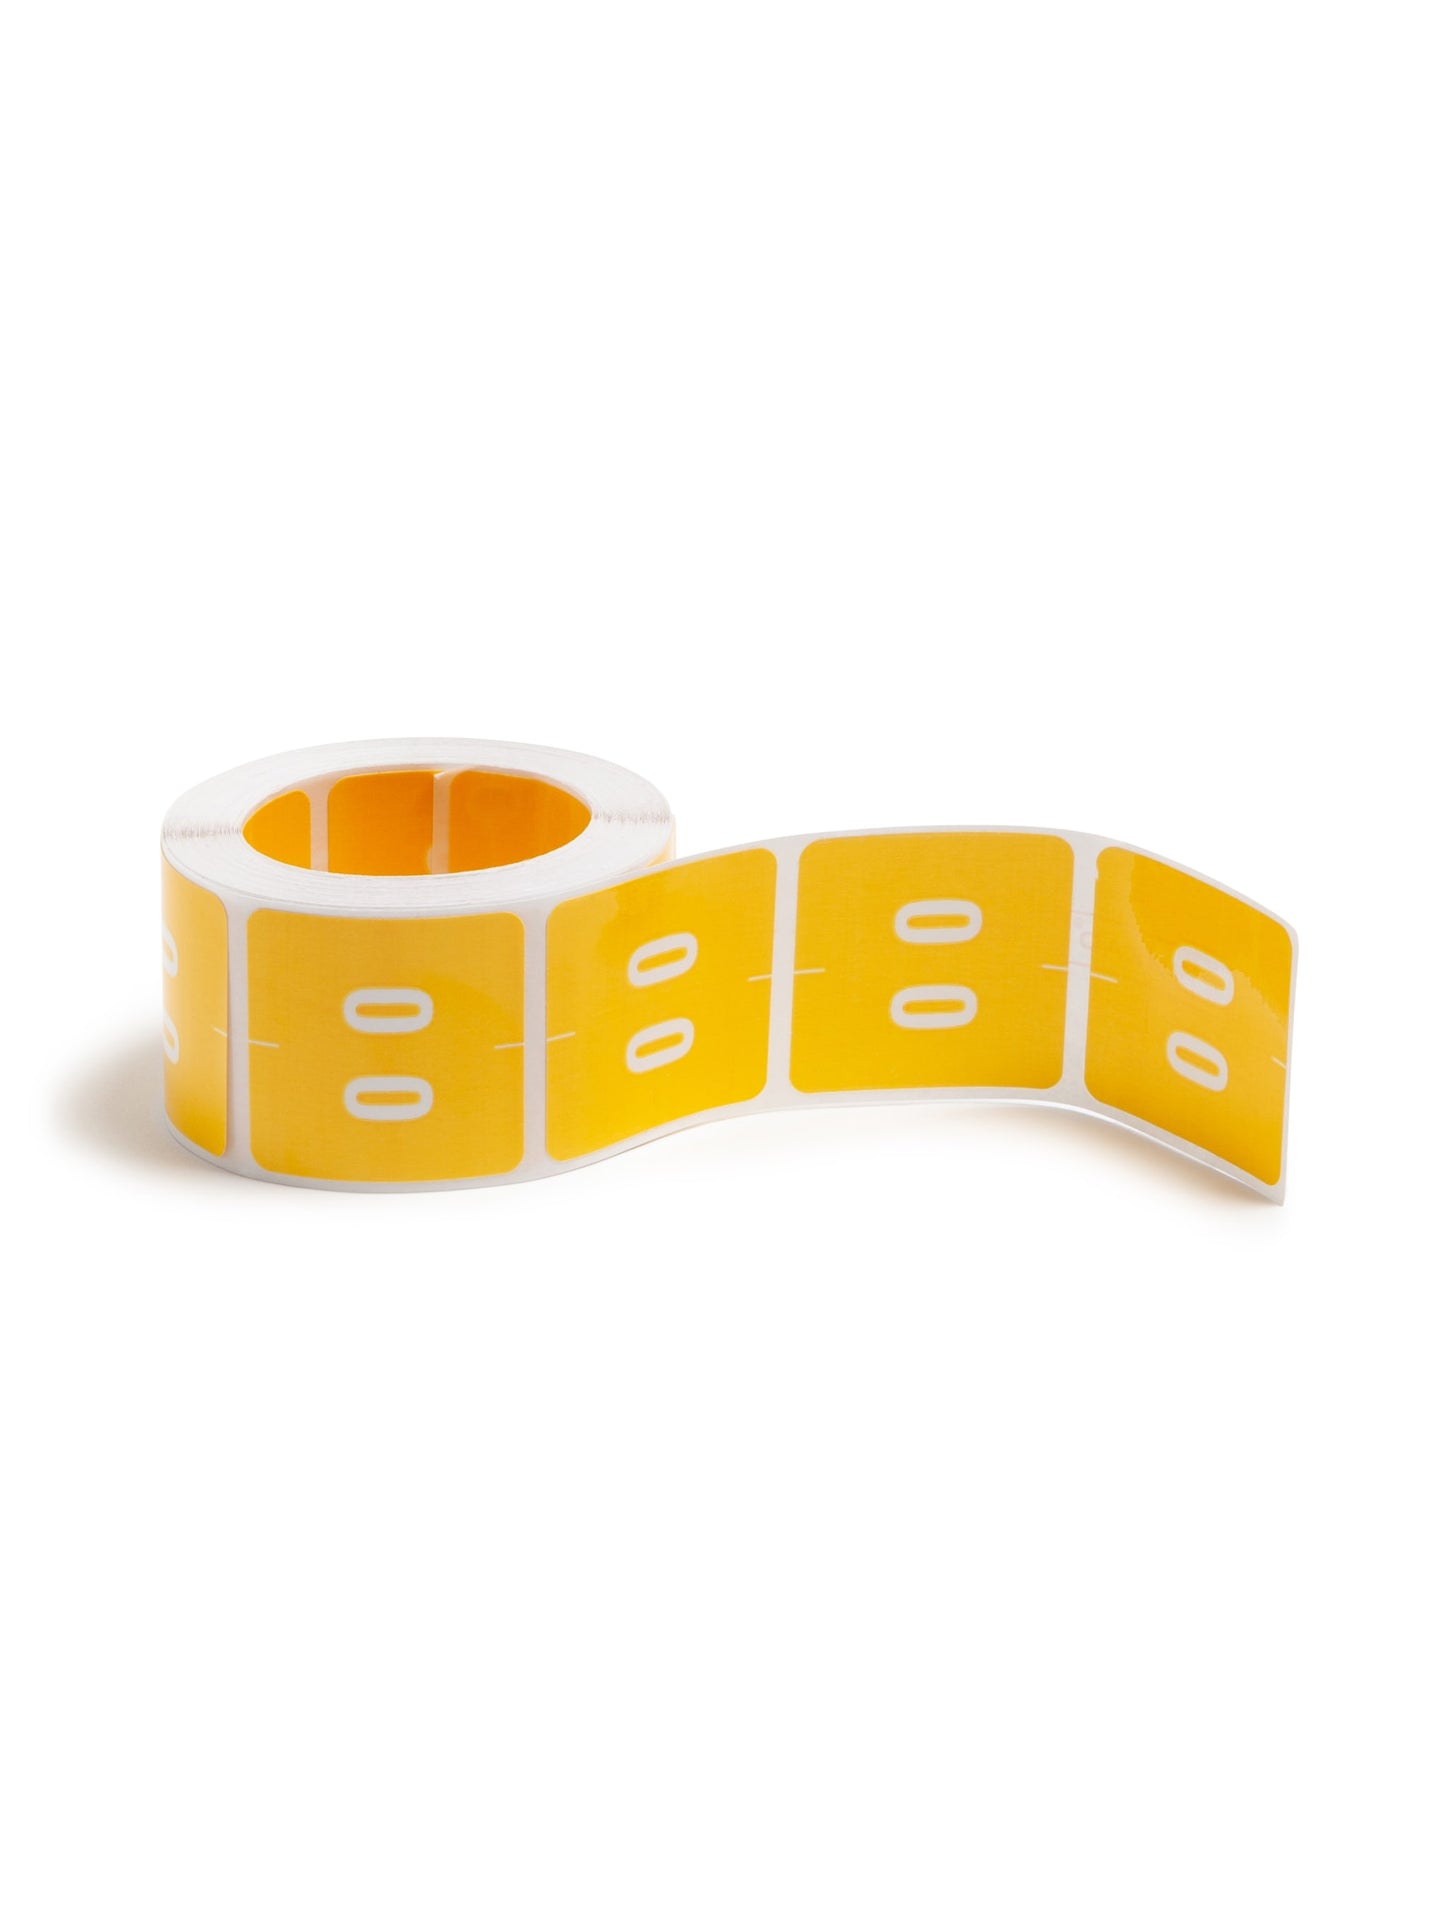 DCC Color-Coded Numeric Labels - Rolls, Yellow Color, 1-1/2" X 1-1/2" Size, Set of 1, 086486674201